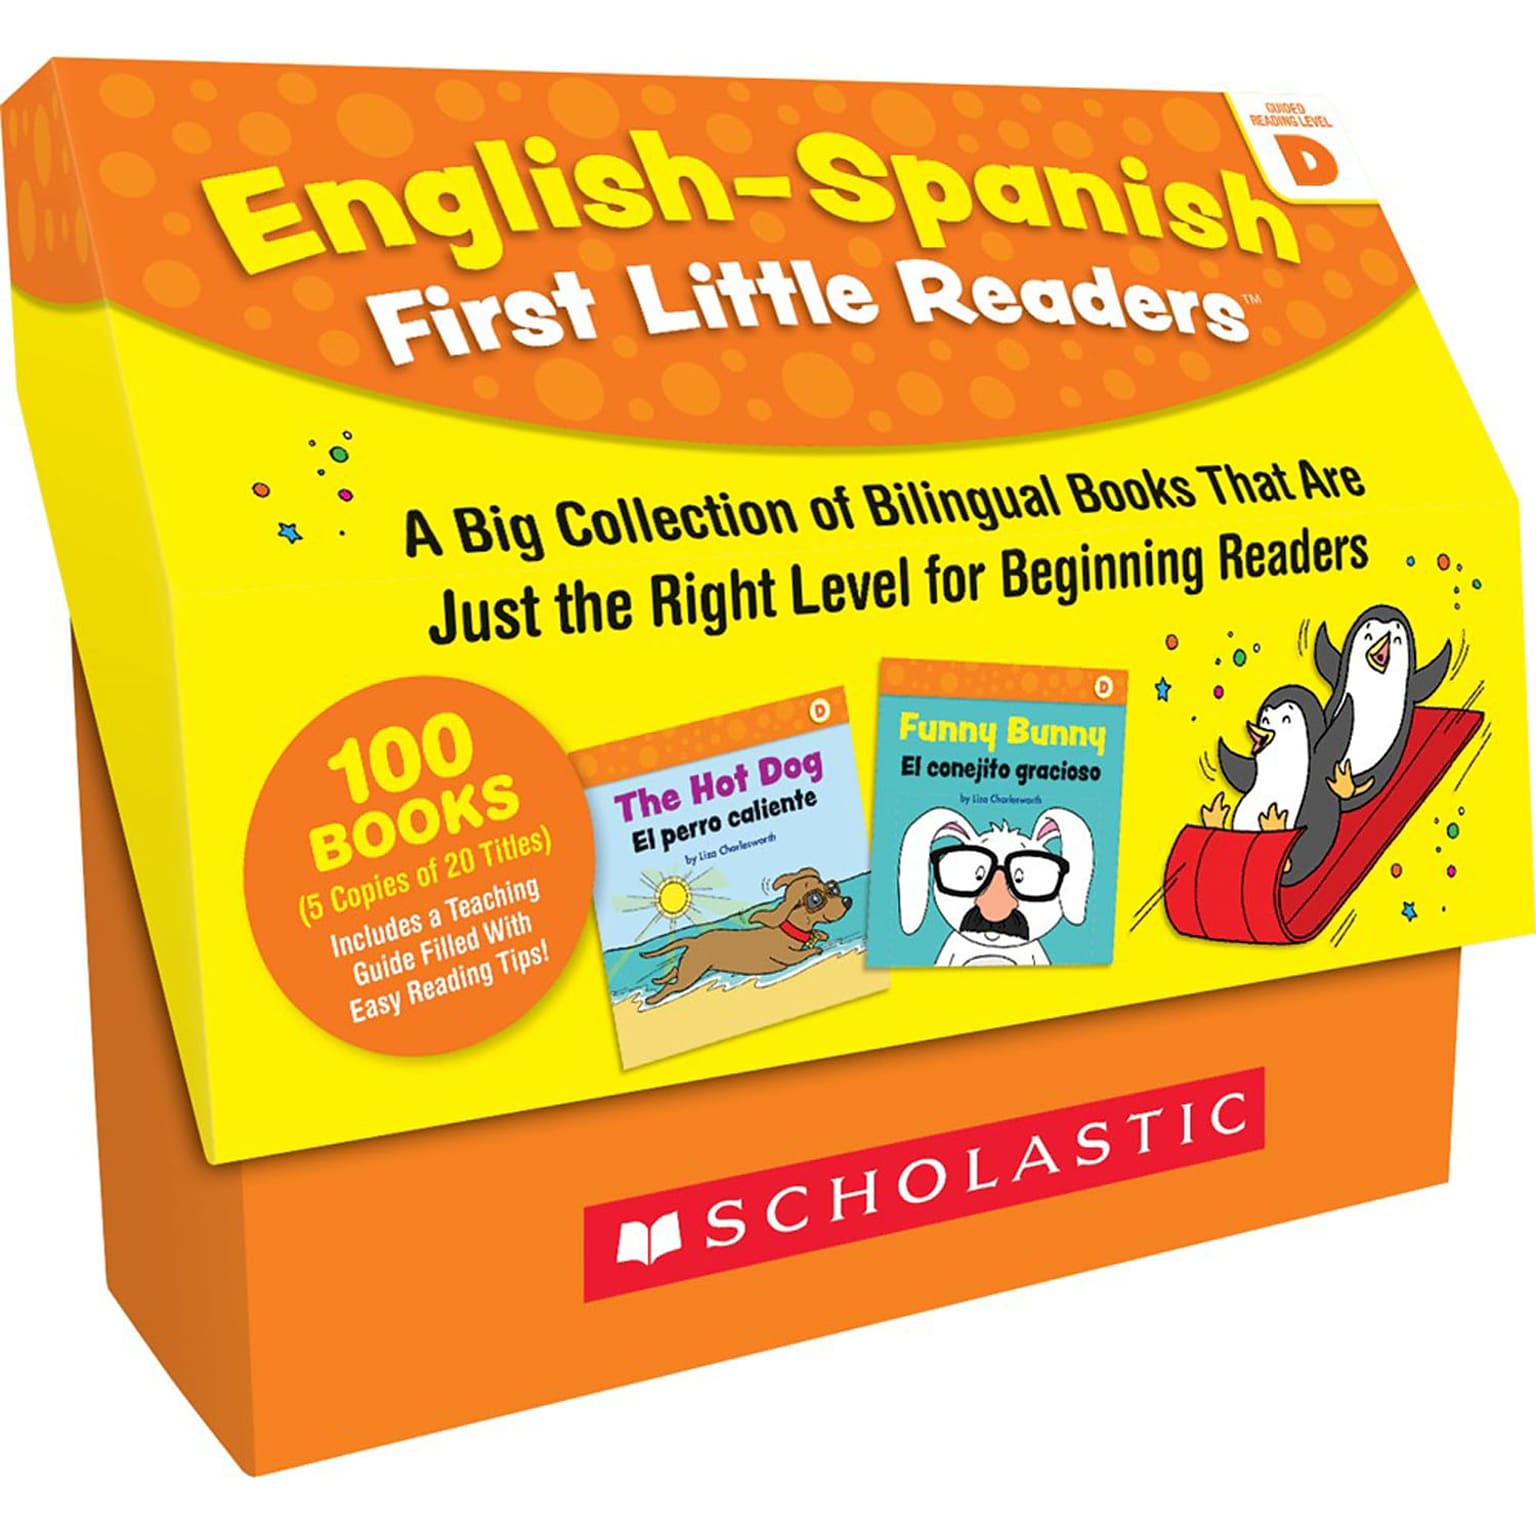 Scholastic Teacher Resources English-Spanish First Little Readers: Guided Reading Level D Classroom Set